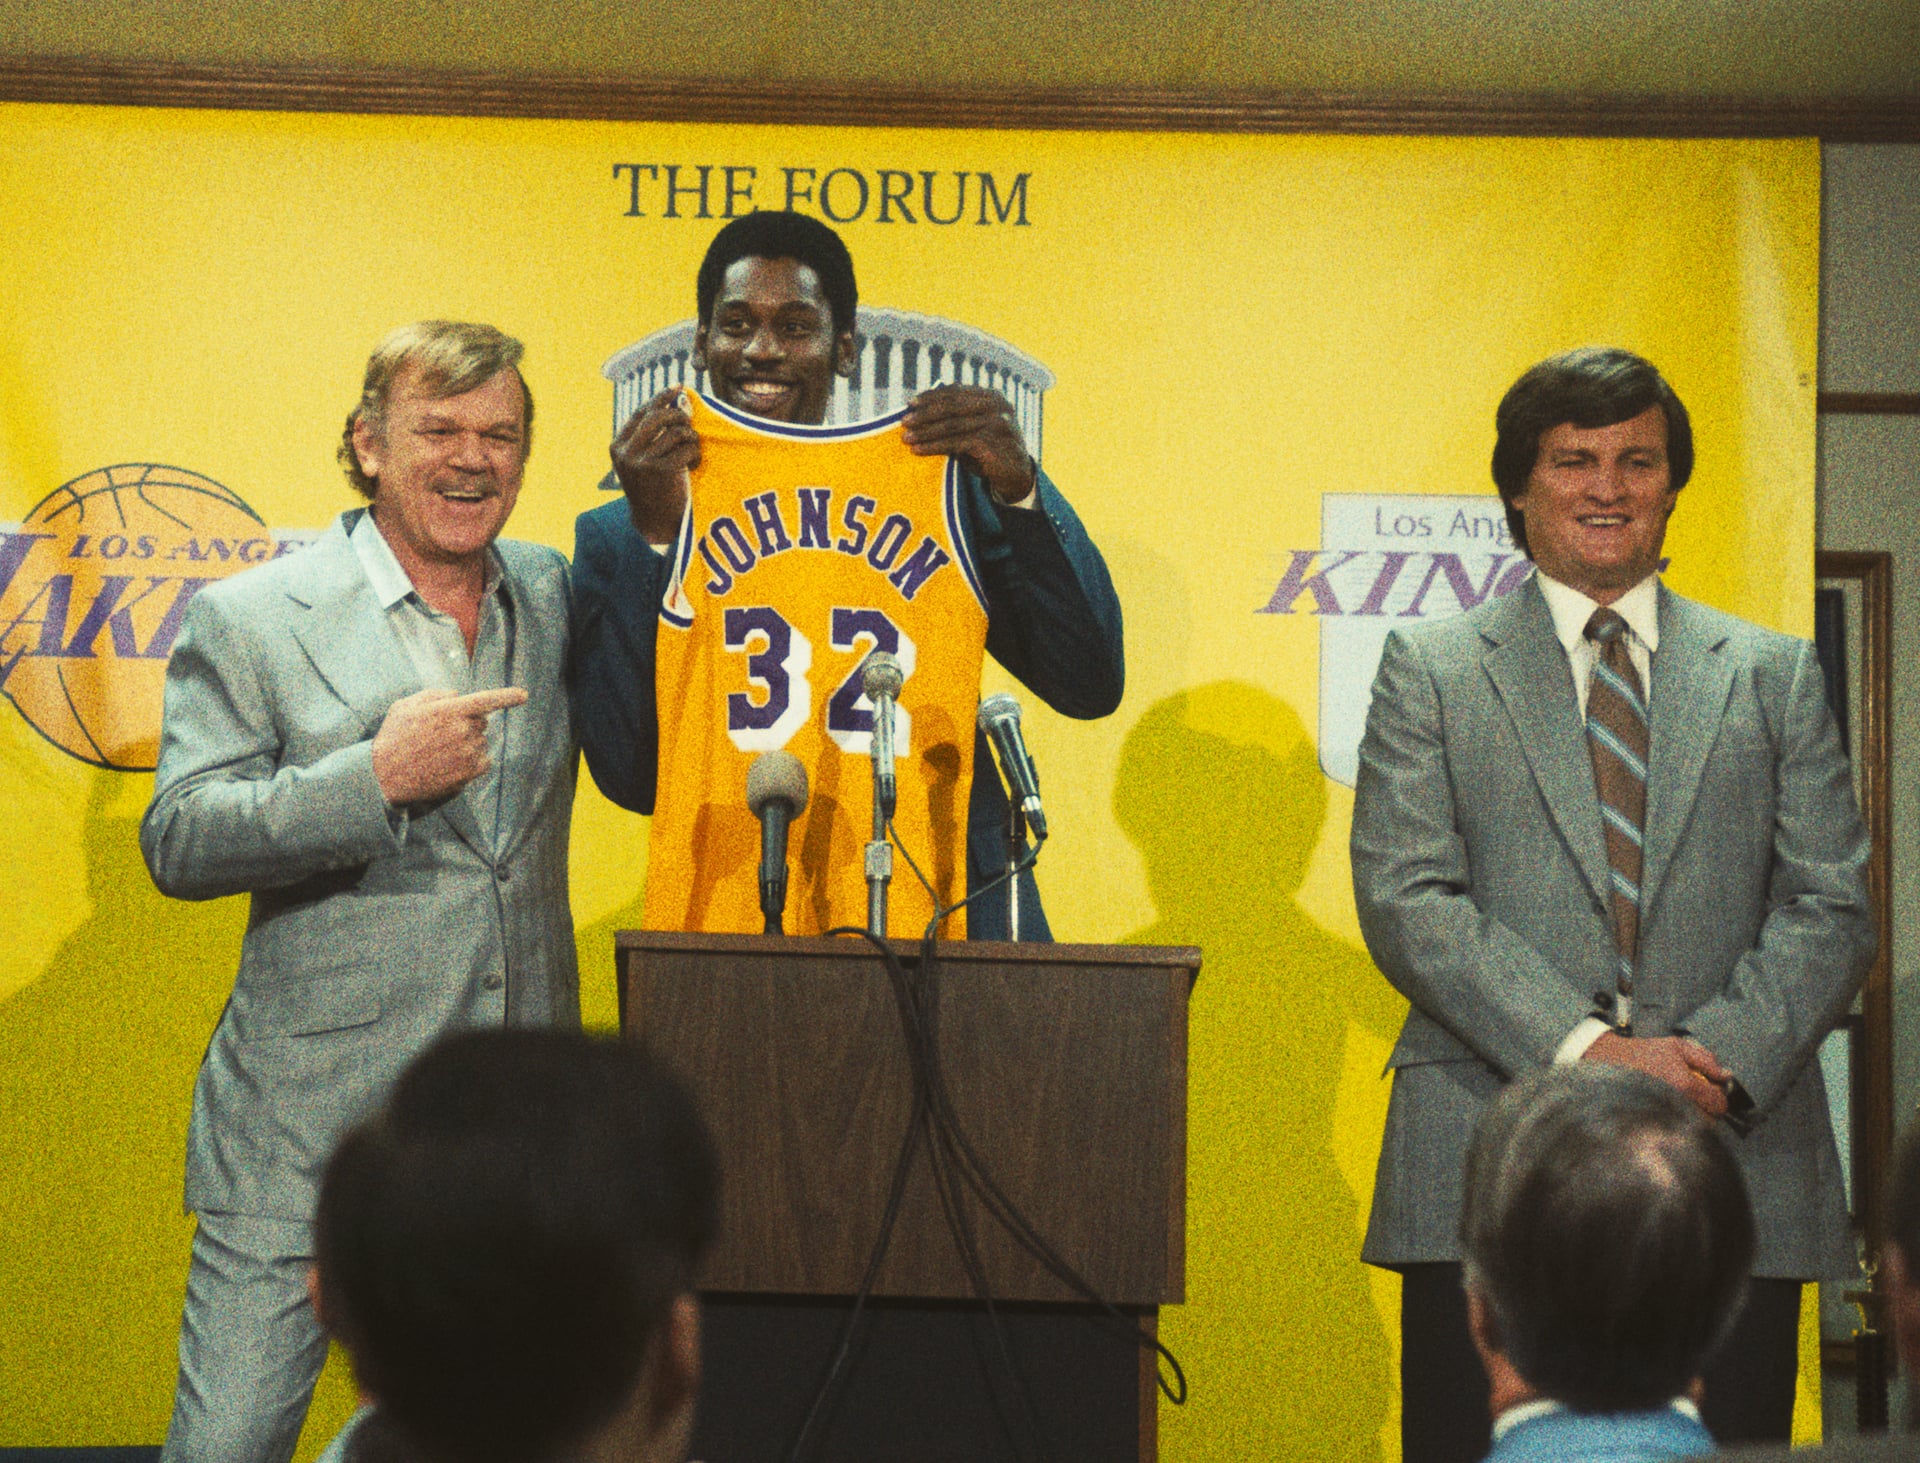 Winning Time: The Rise of the Lakers Dynasty and a family dynamic